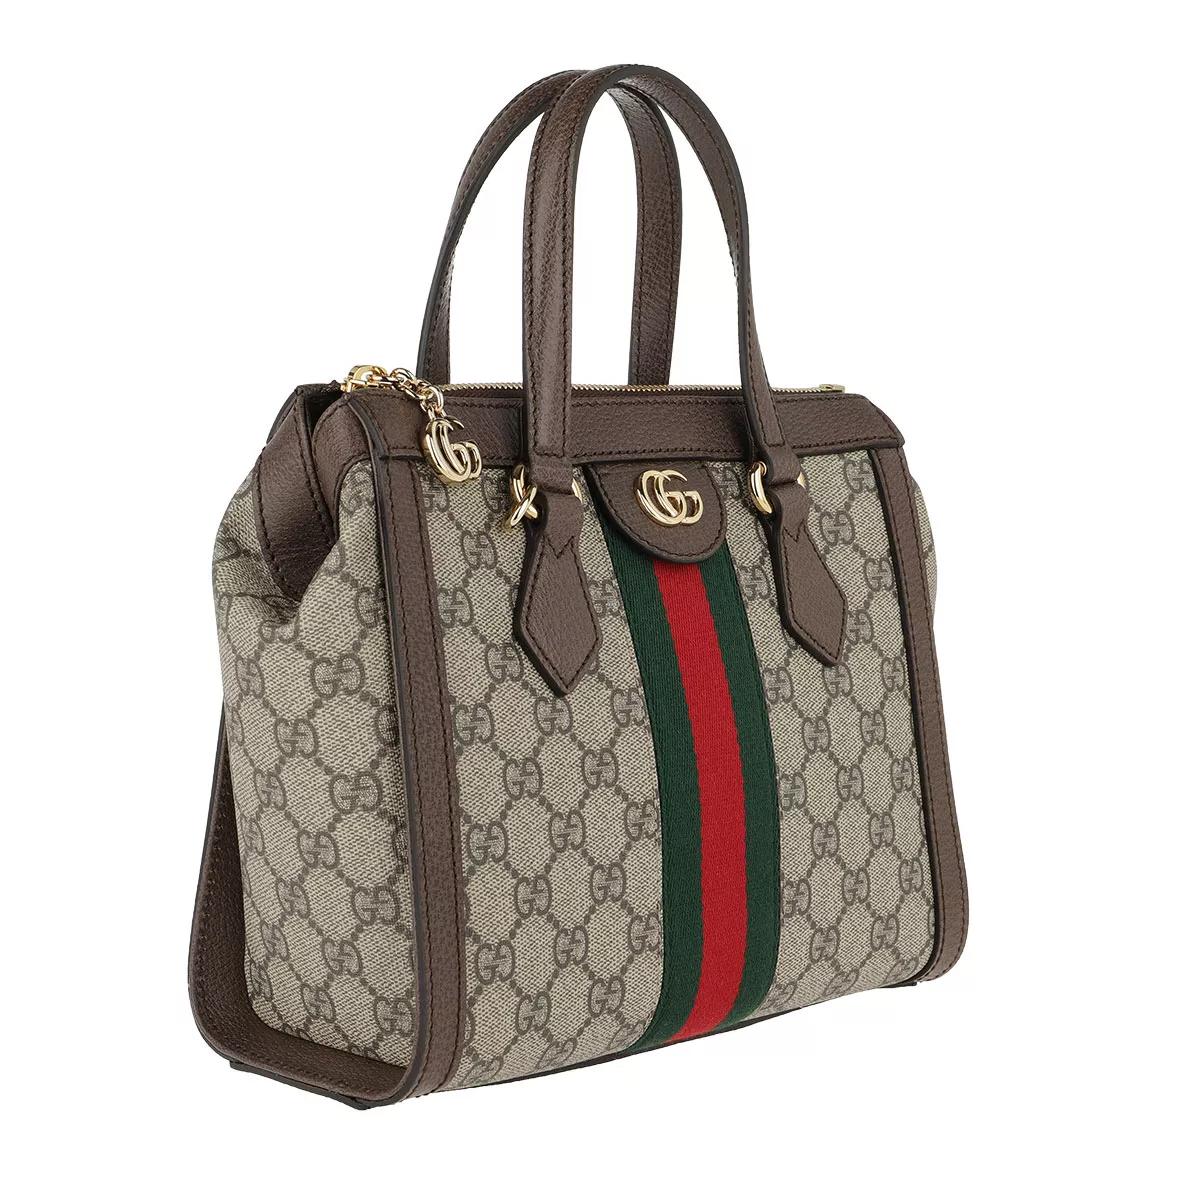 Gucci Totes Ophidia Tote Bag Canvas Small in bruin